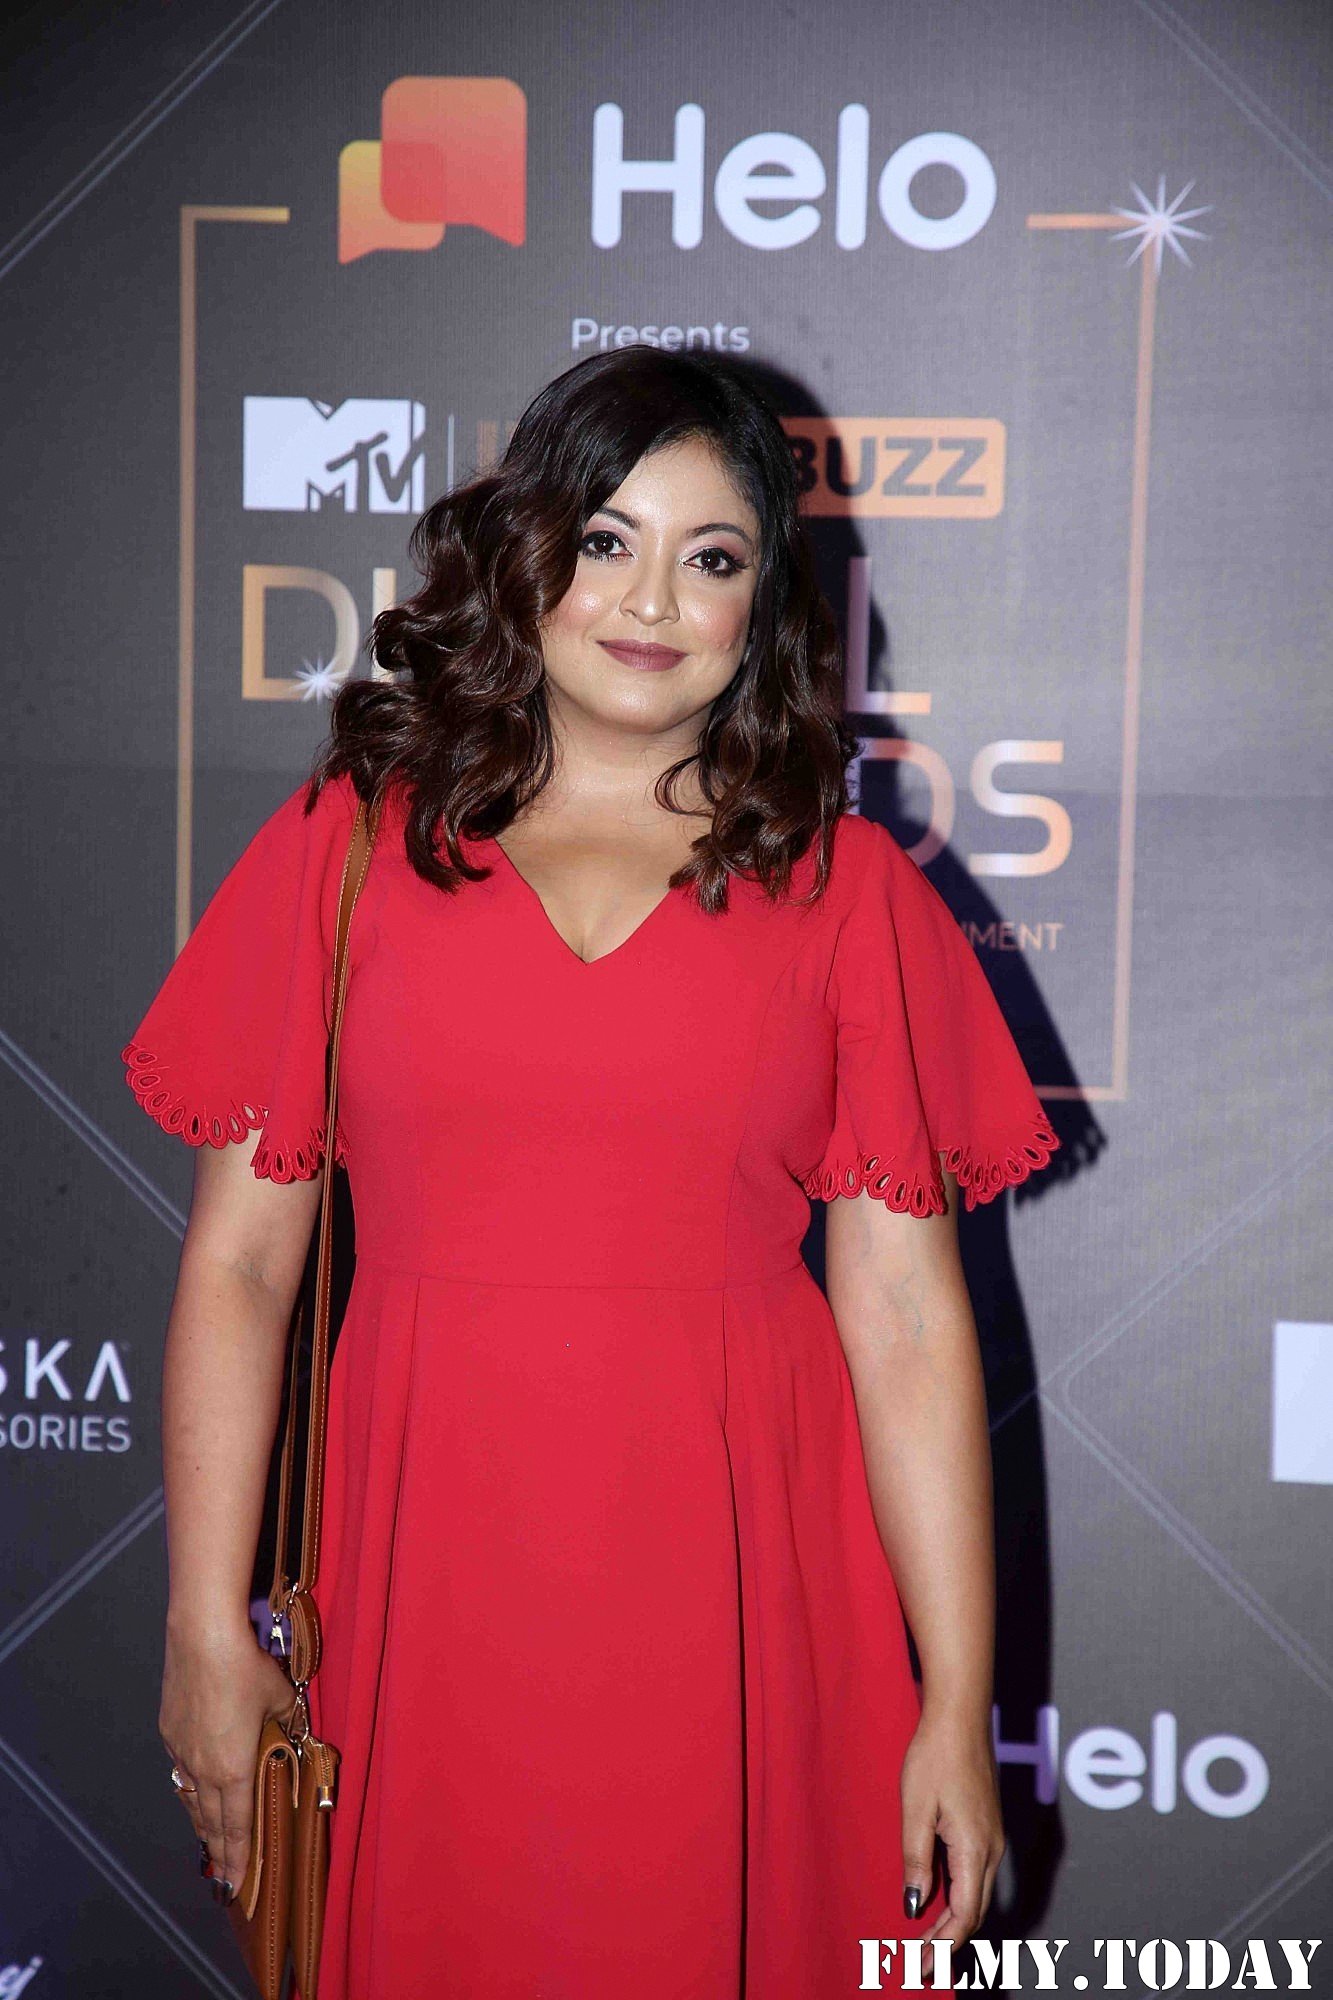 Tanushree Dutta - Photos: Red Carpet For The 2nd Edition Of MTV IWMBuzz Digital Awards | Picture 1698169